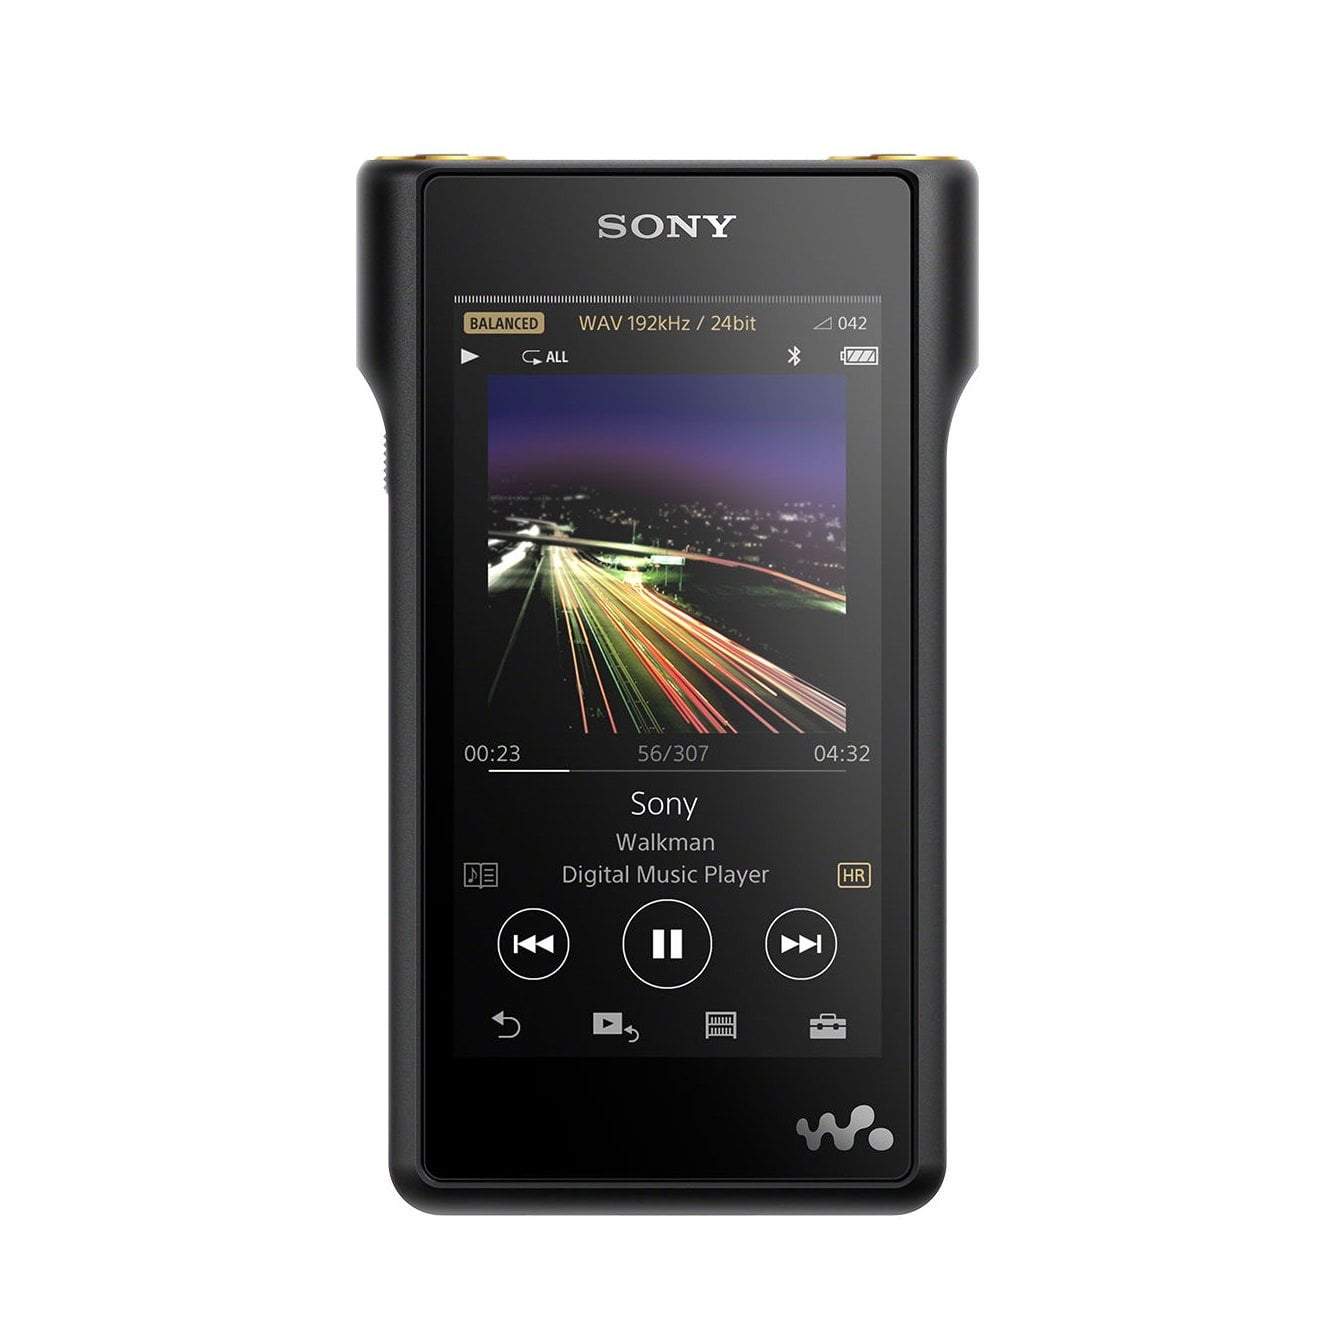 Mp3 sony player software